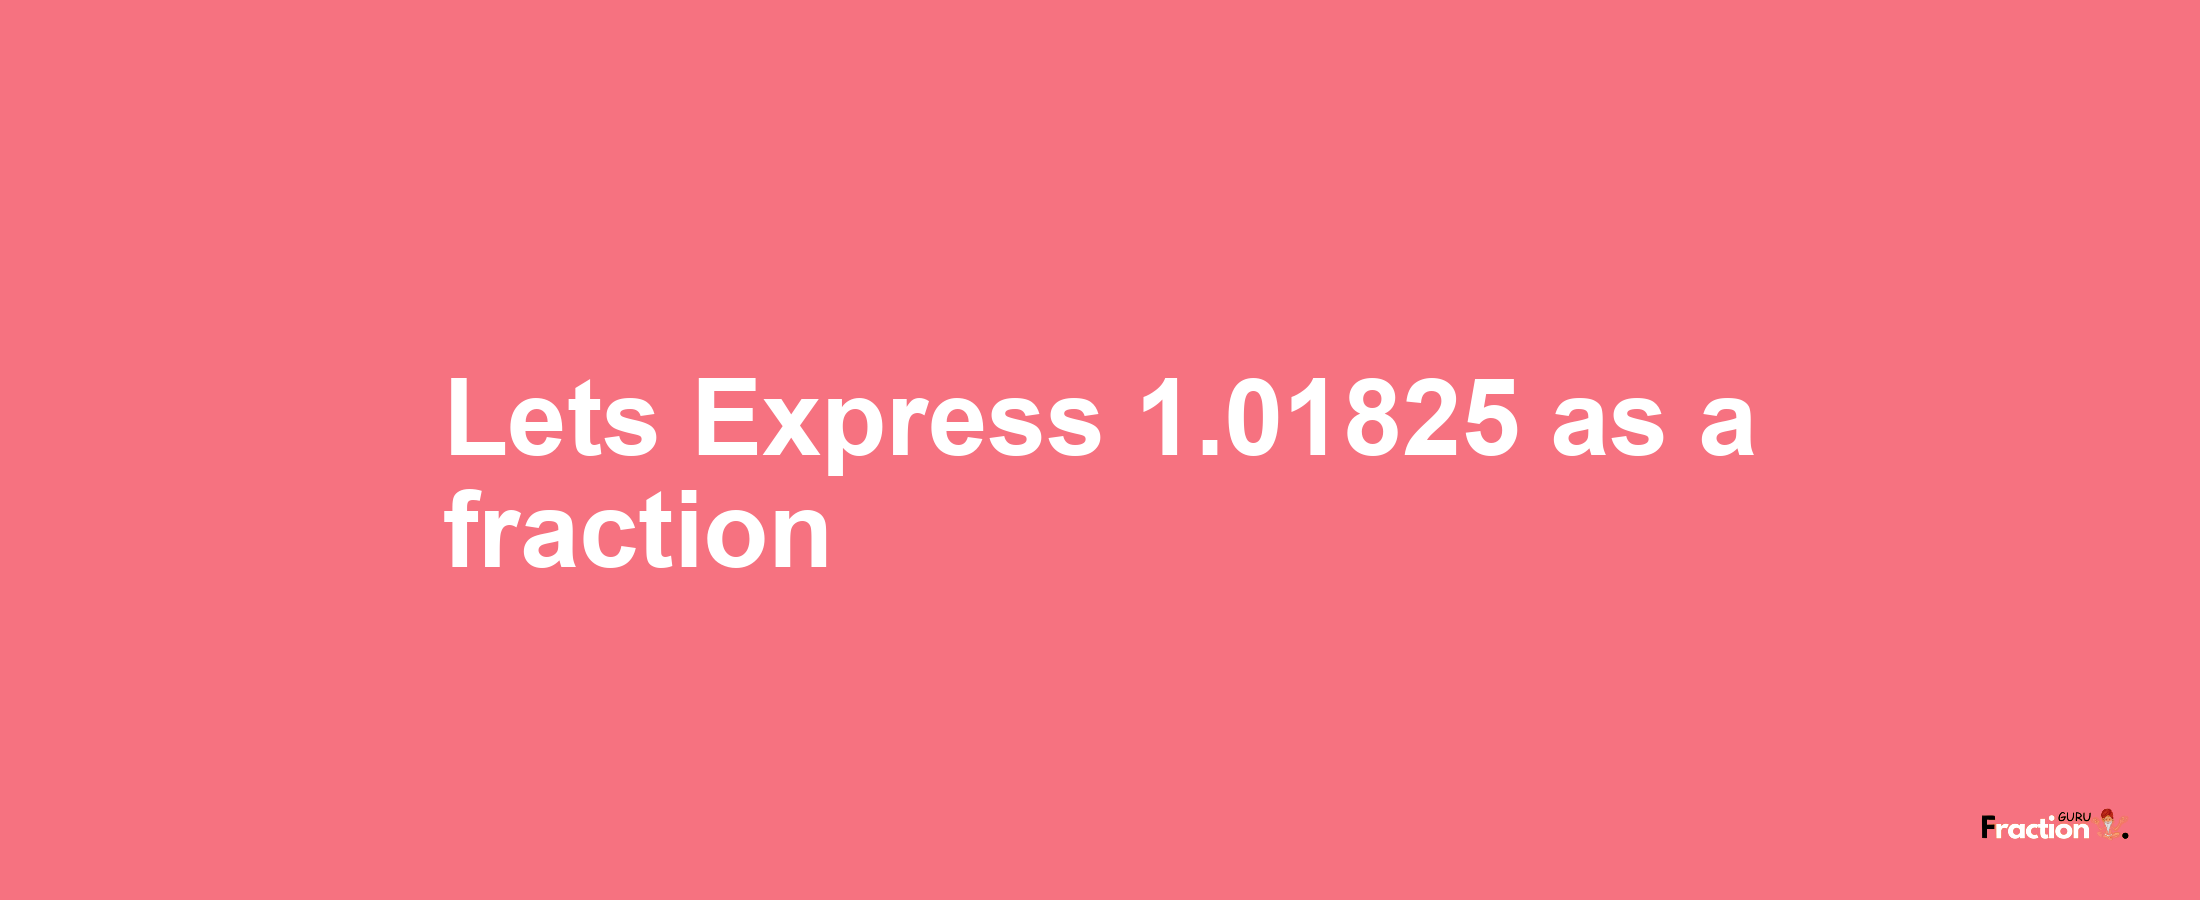 Lets Express 1.01825 as afraction